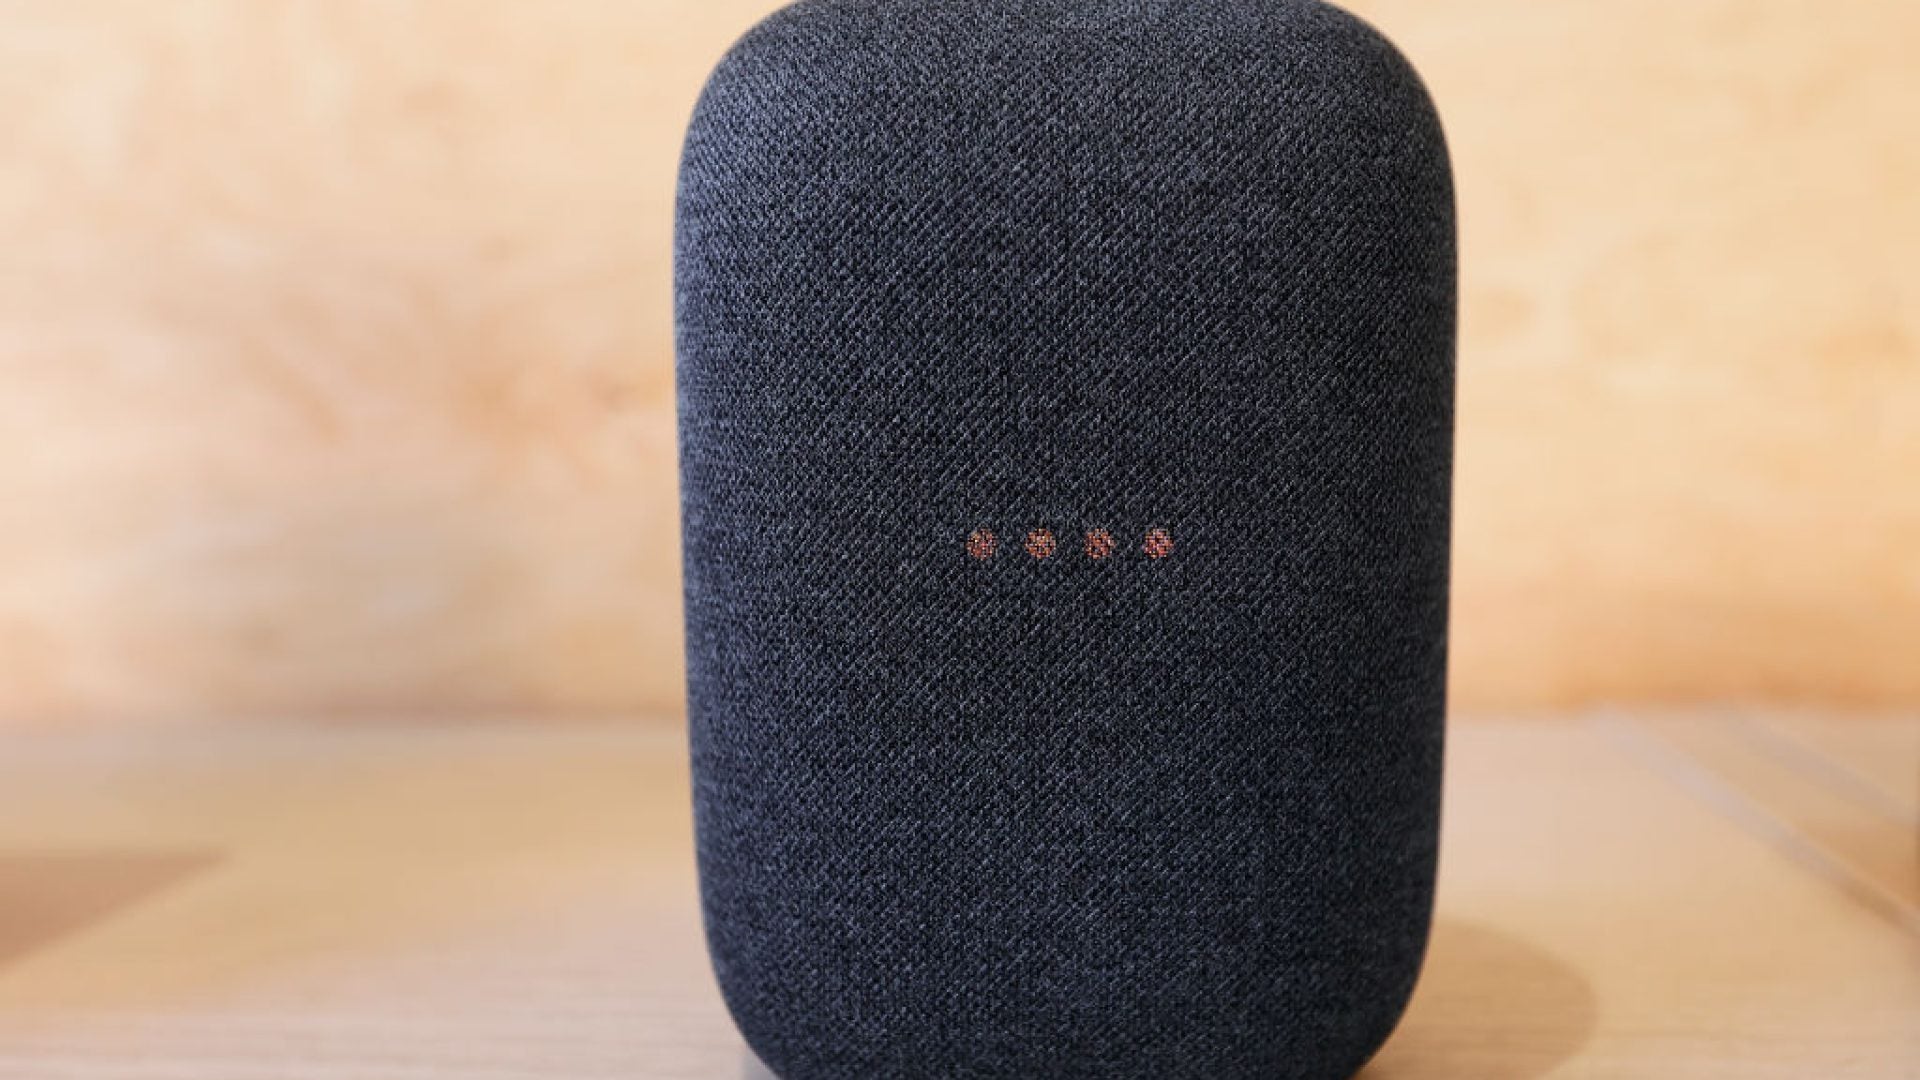 Smart Speakers That Can "Code Switch" To Understand Black Voices Better May Be On The Way